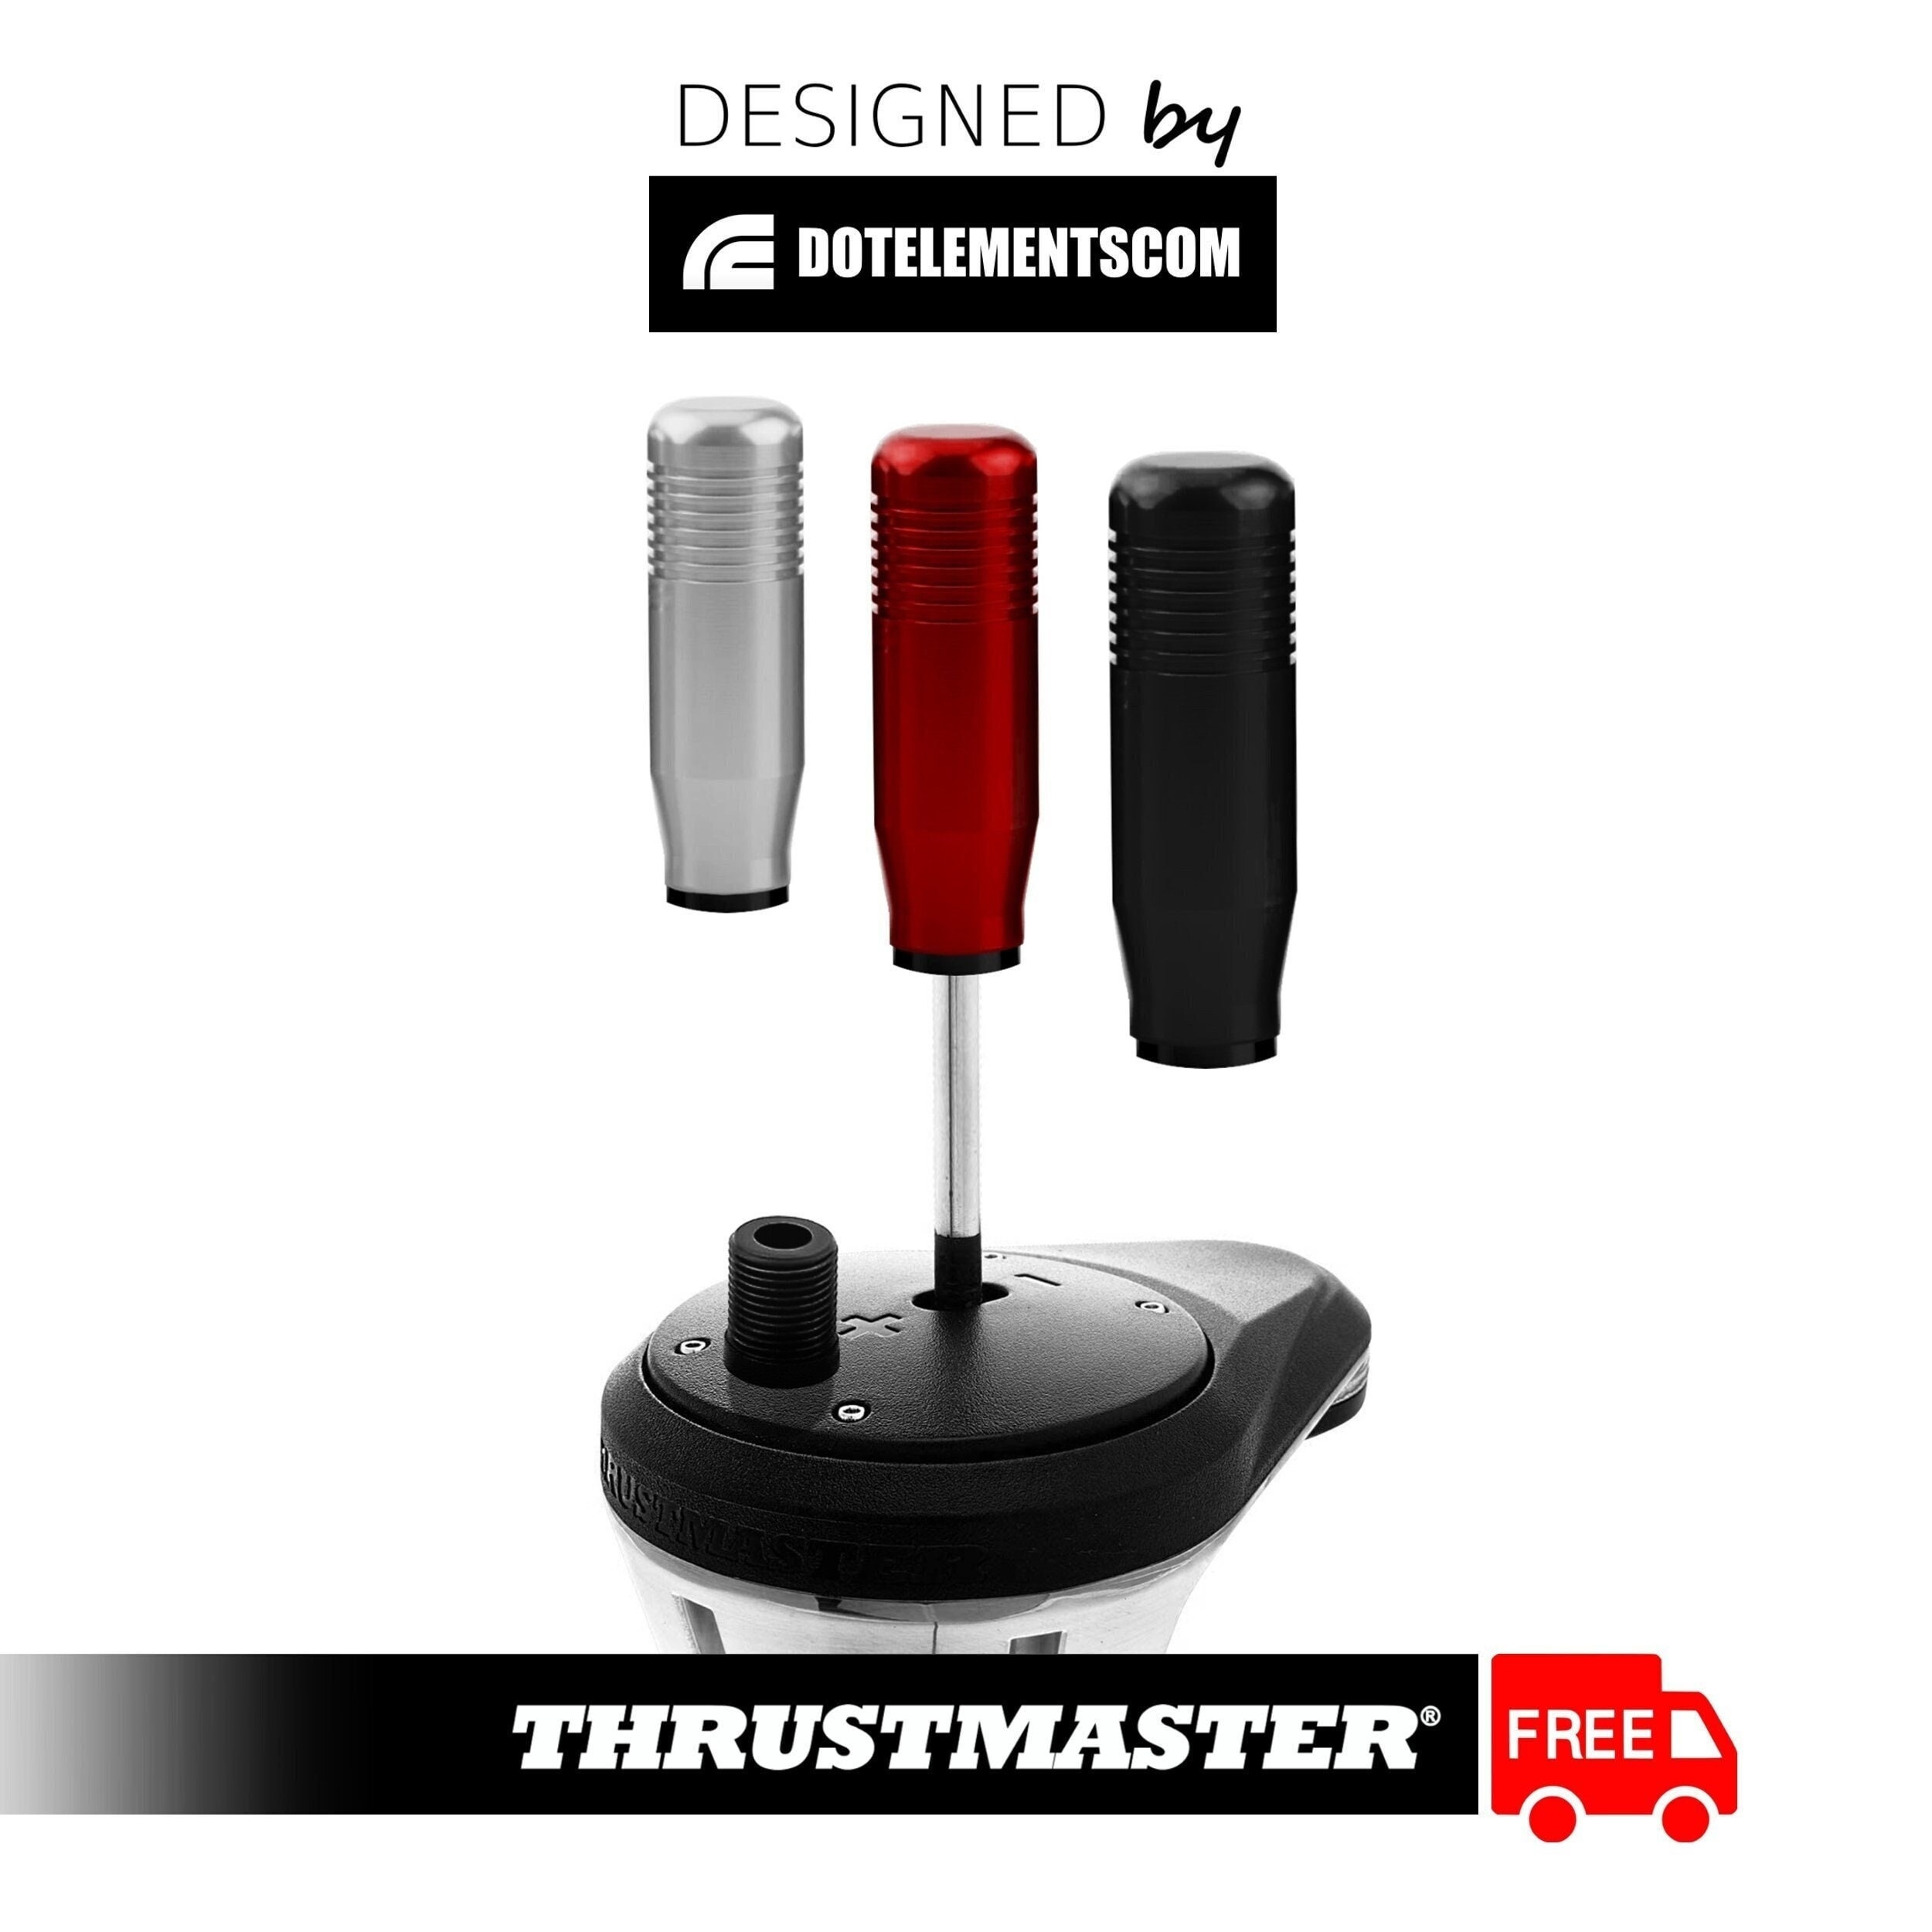 TH8A Manual Shifter Sequential Shifter (for Thrustmaster) + Shifter Handle